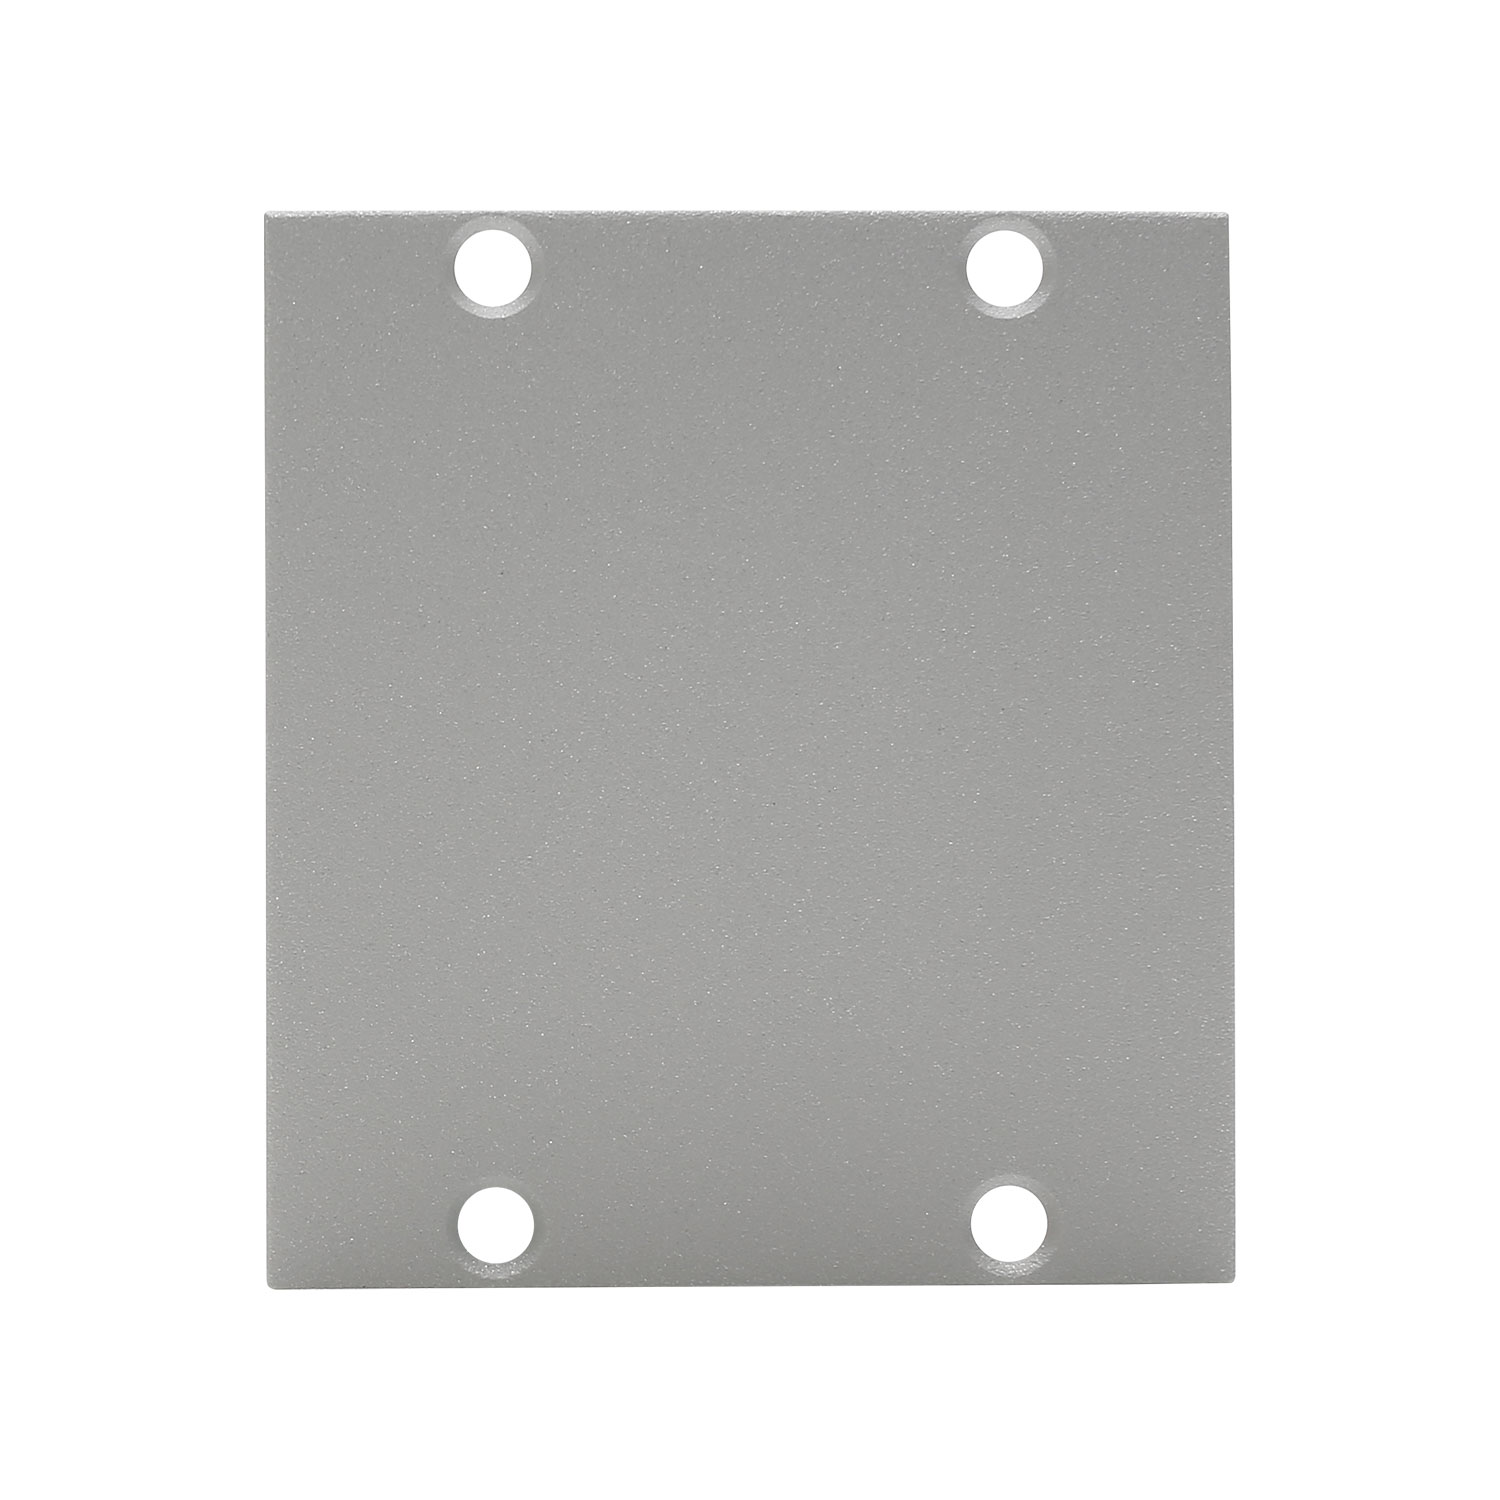 Side panel blank panel, 2 HE; depth: 80 mm for SYSBOXX, colour: silver